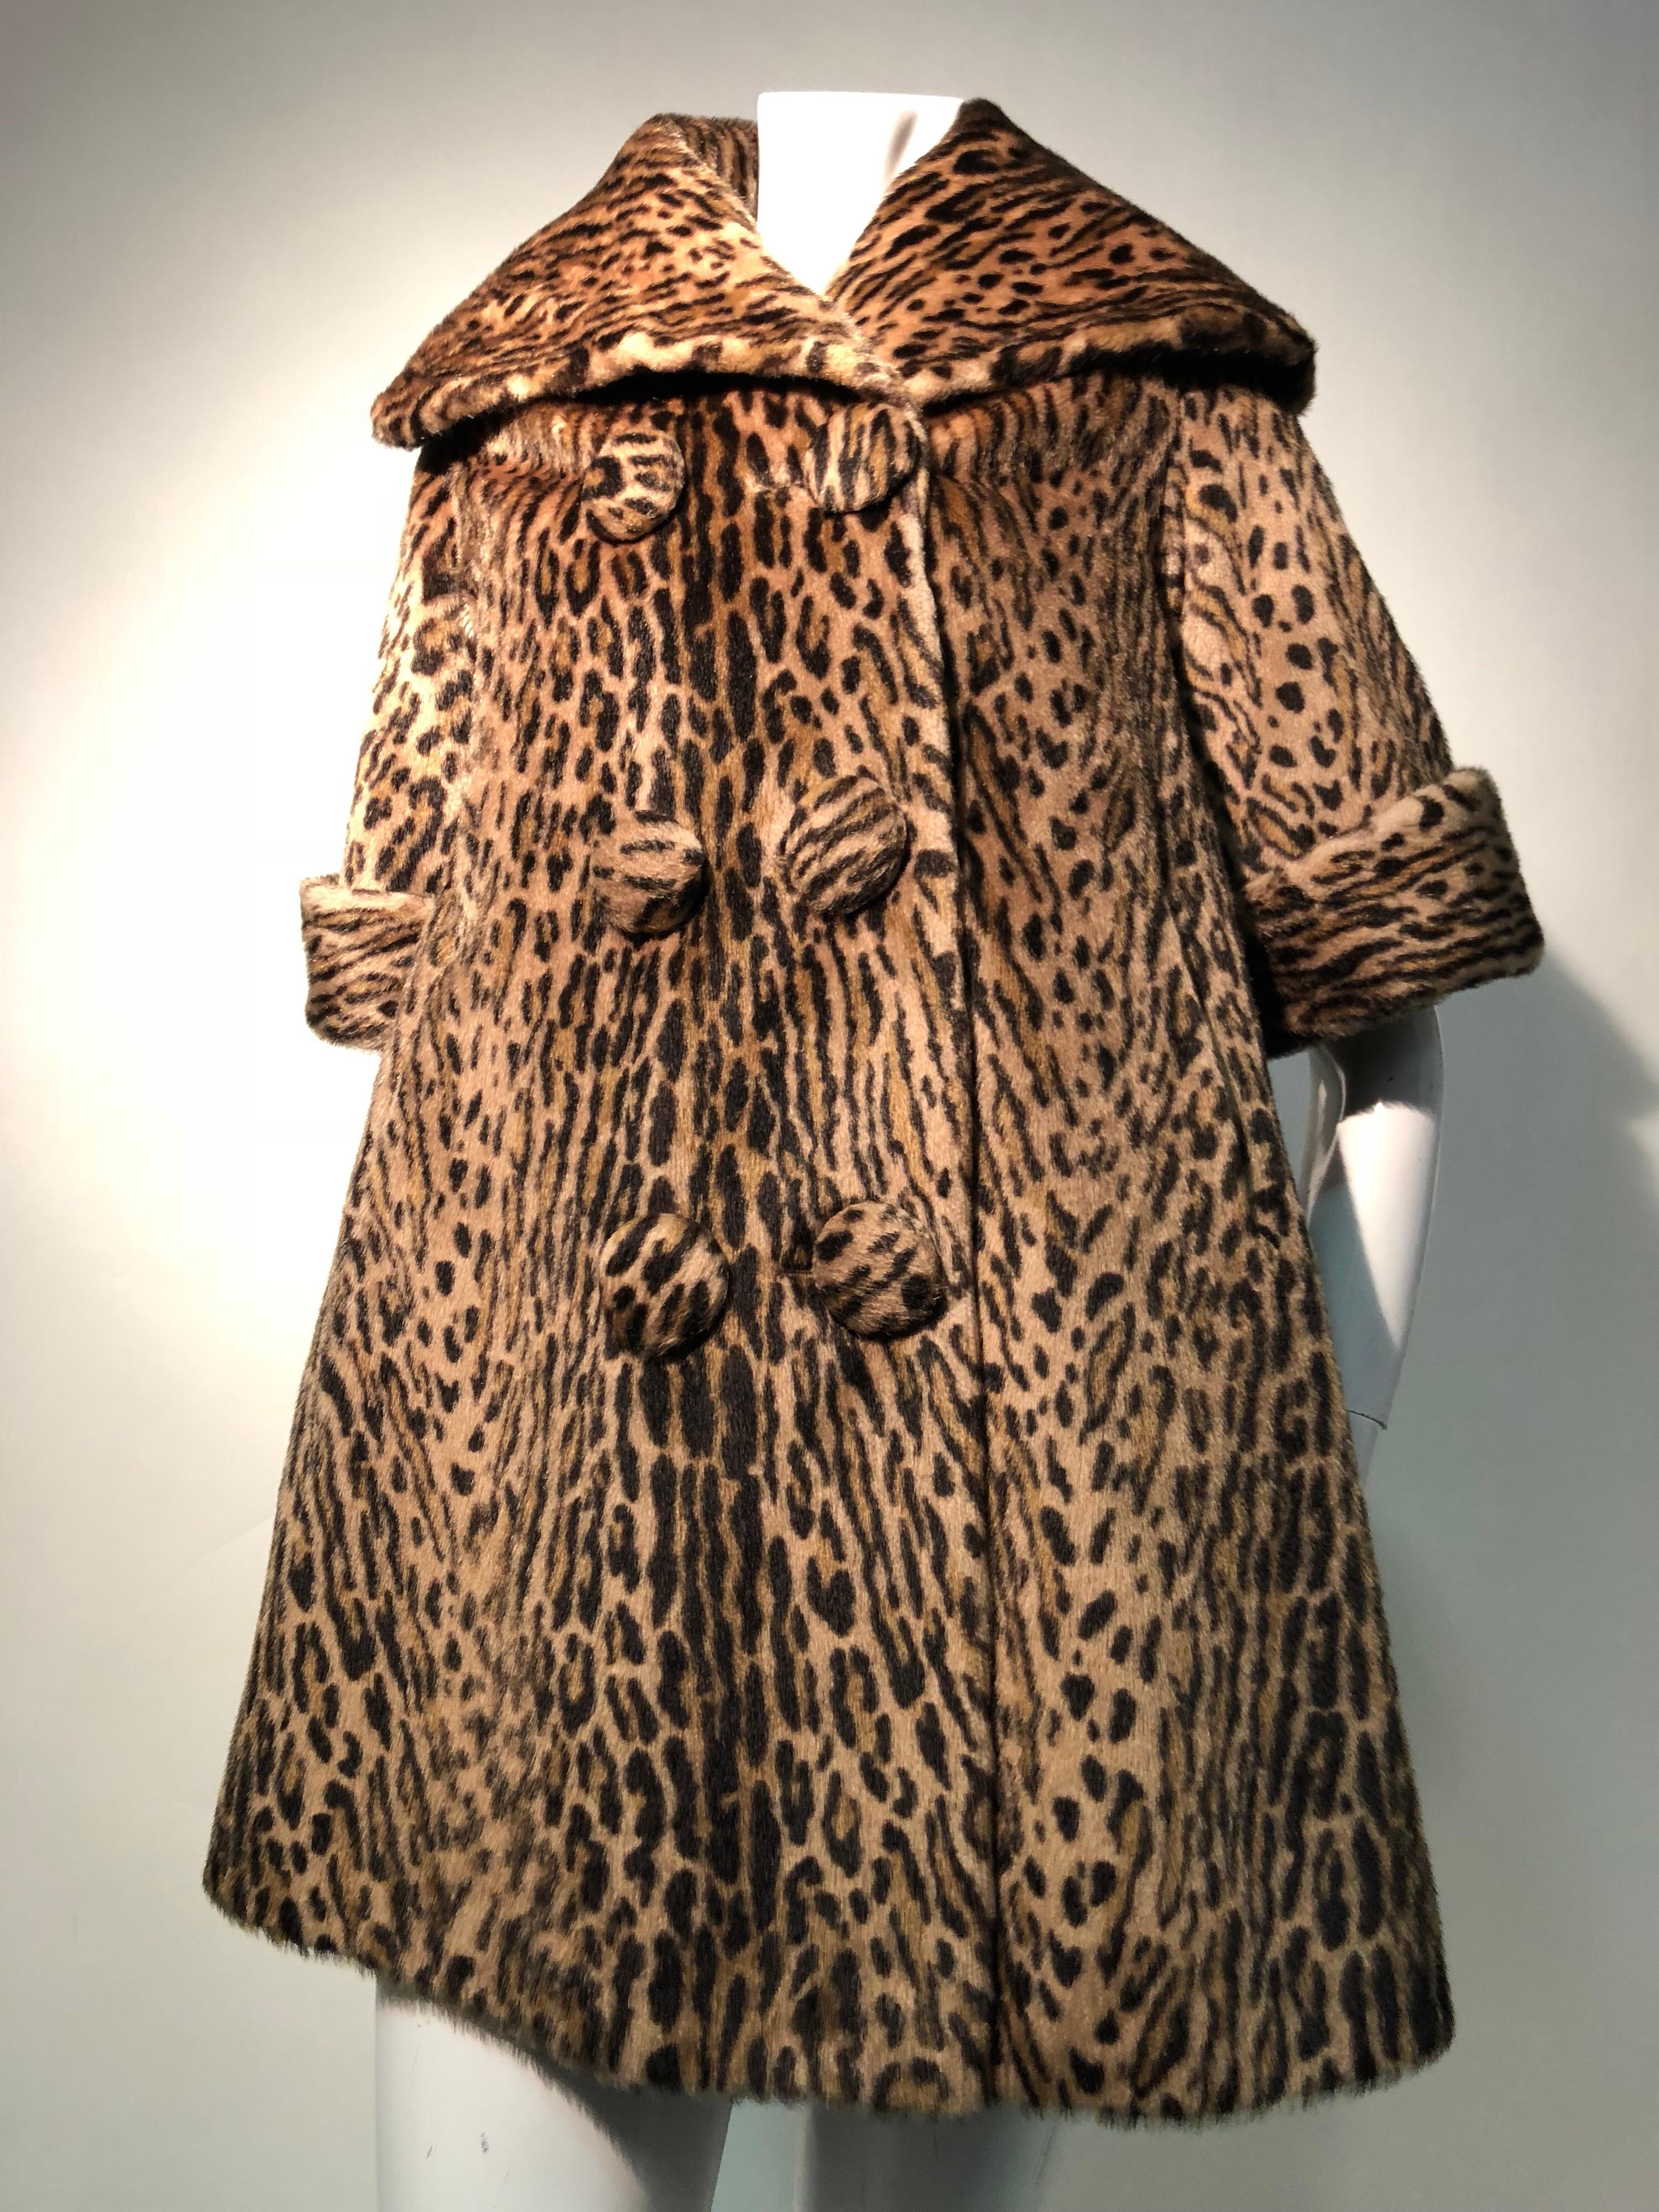 A fantastic 1950s Kashan faux leopard fur double-breasted three quarter length sleeve swing coat with large collar. Can be worn up to ward off a stiff breeze. A great look with longer gloves for winter. Fully lined. This is of the quality of faux